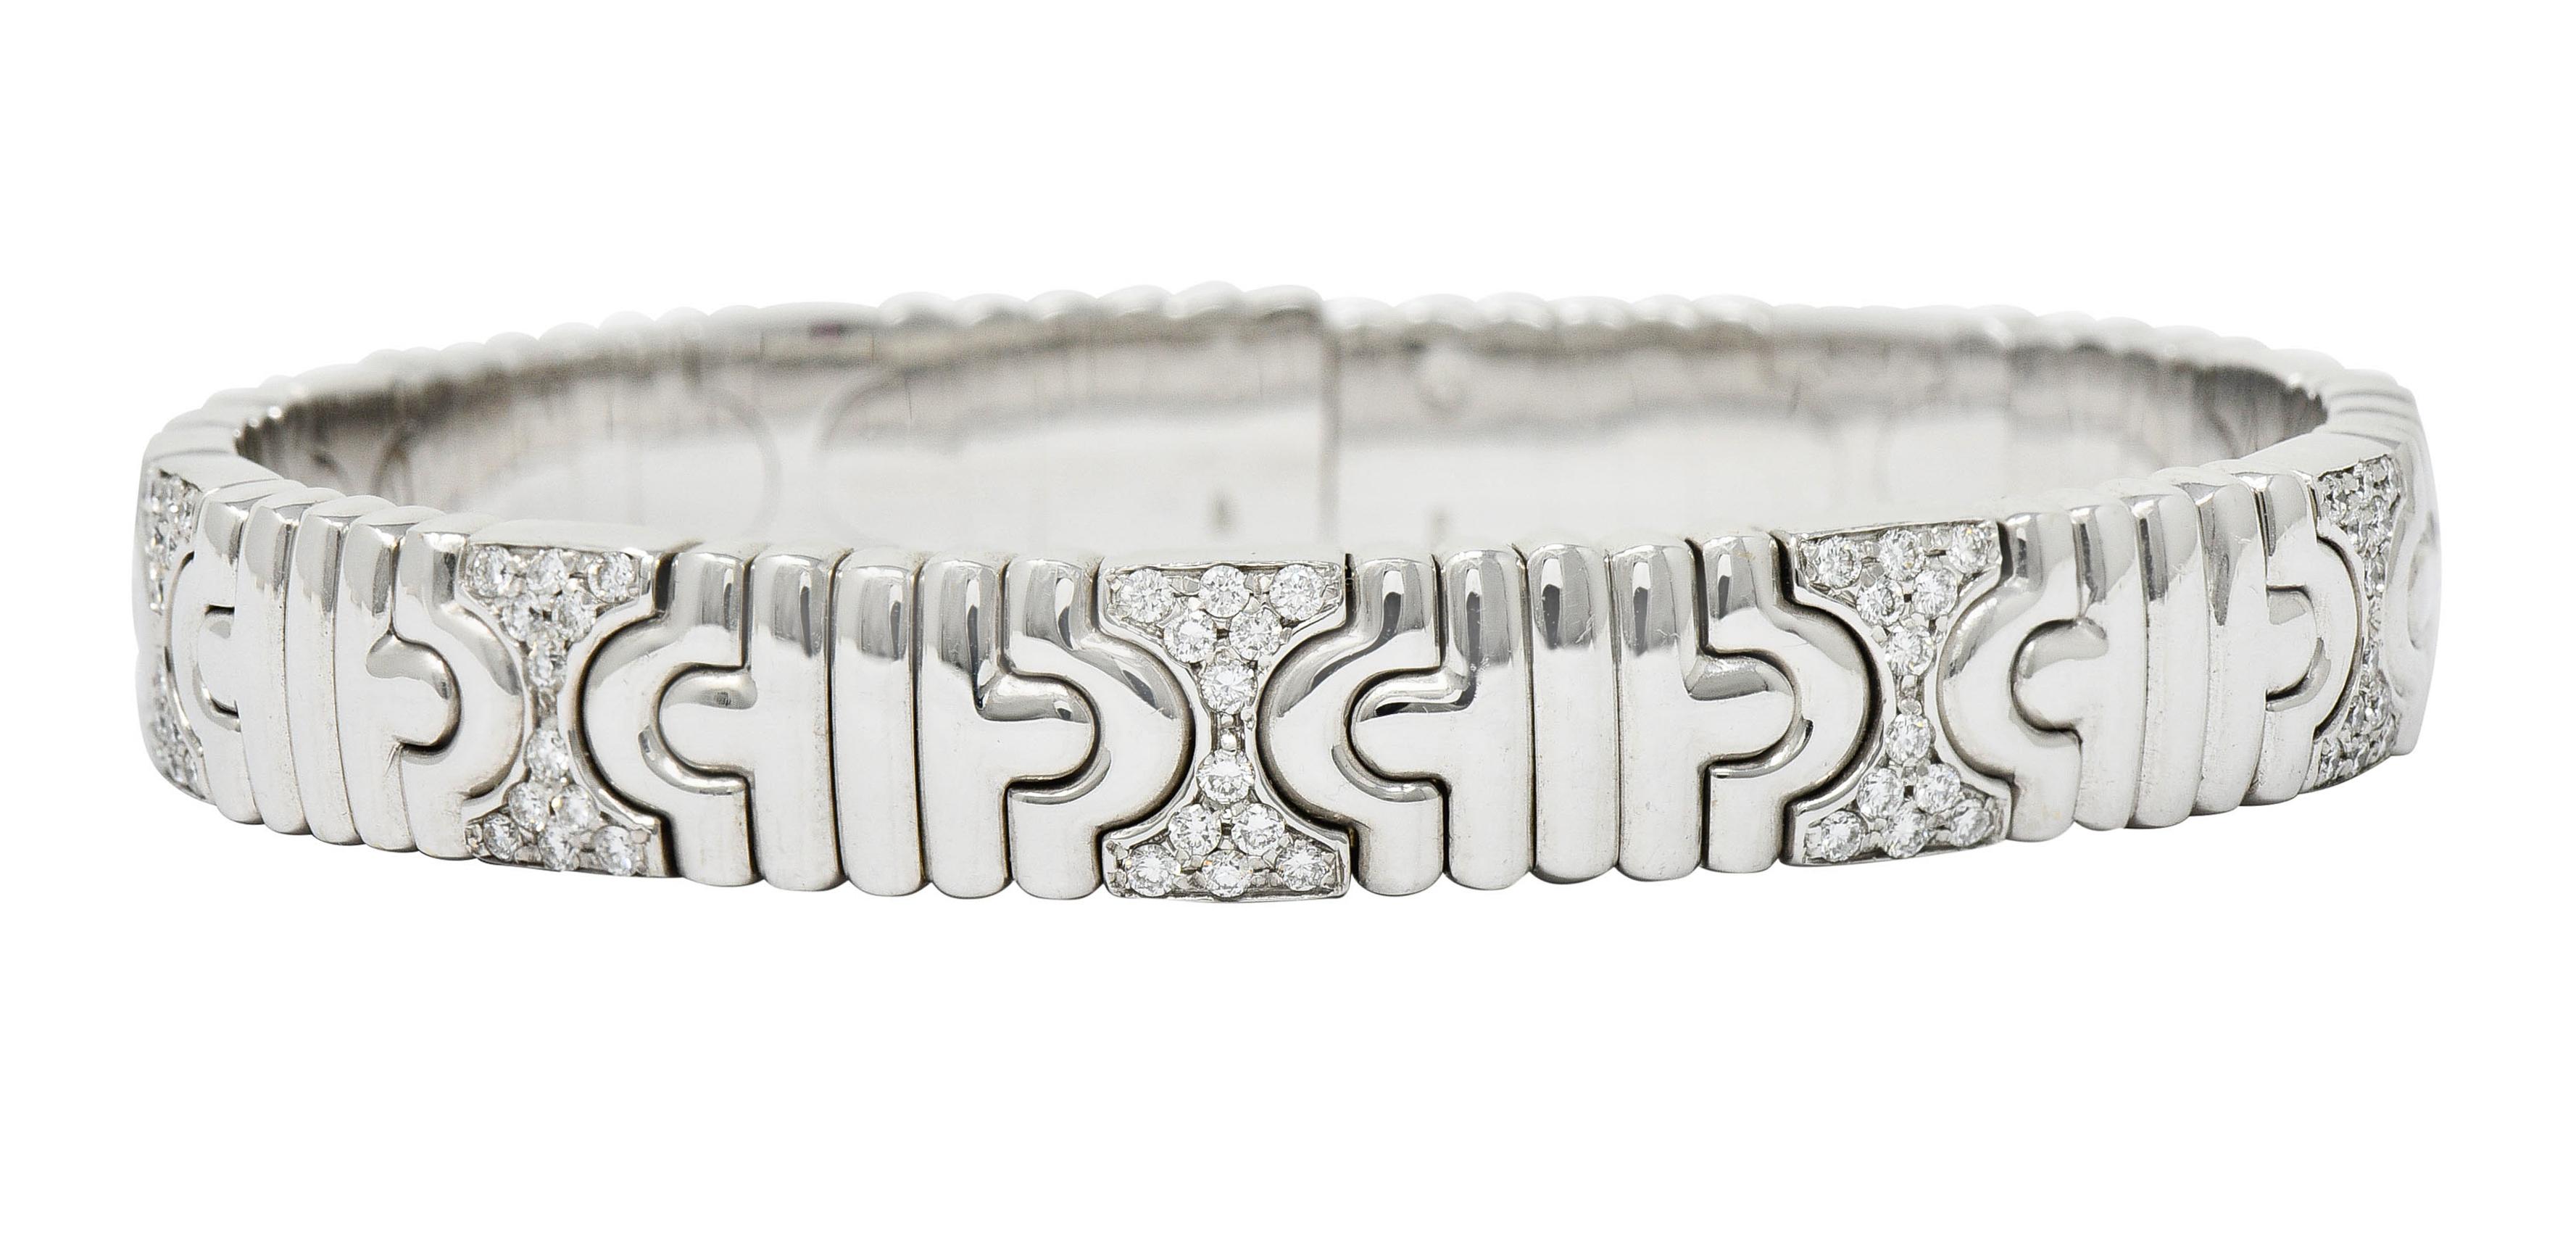 Cuff bracelet is comprised of curved chevron links alternating with an hour glass motif

Pavè set with round brilliant cut diamonds weighing in total approximately 1.50 carats - G/H color with VS clarity

With Italian assay marks for 18 karat gold